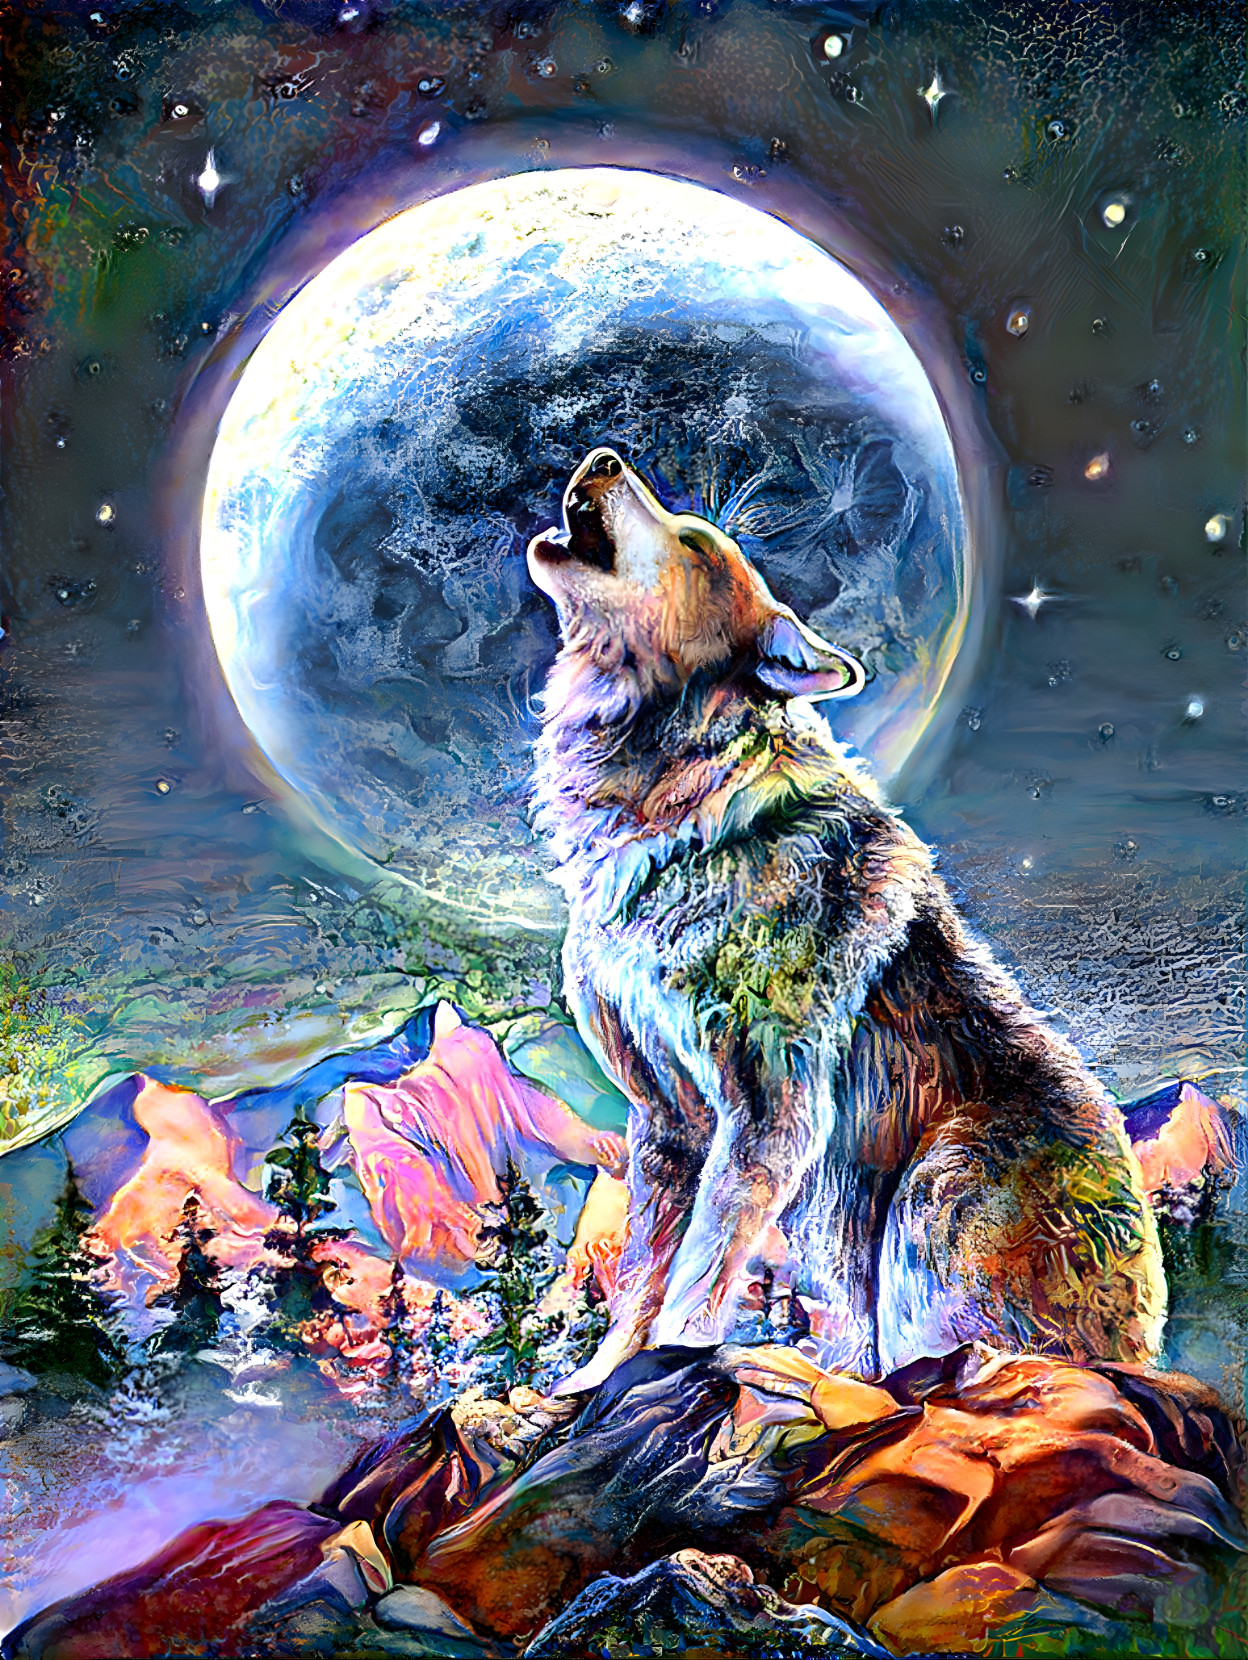 Howling Wolf